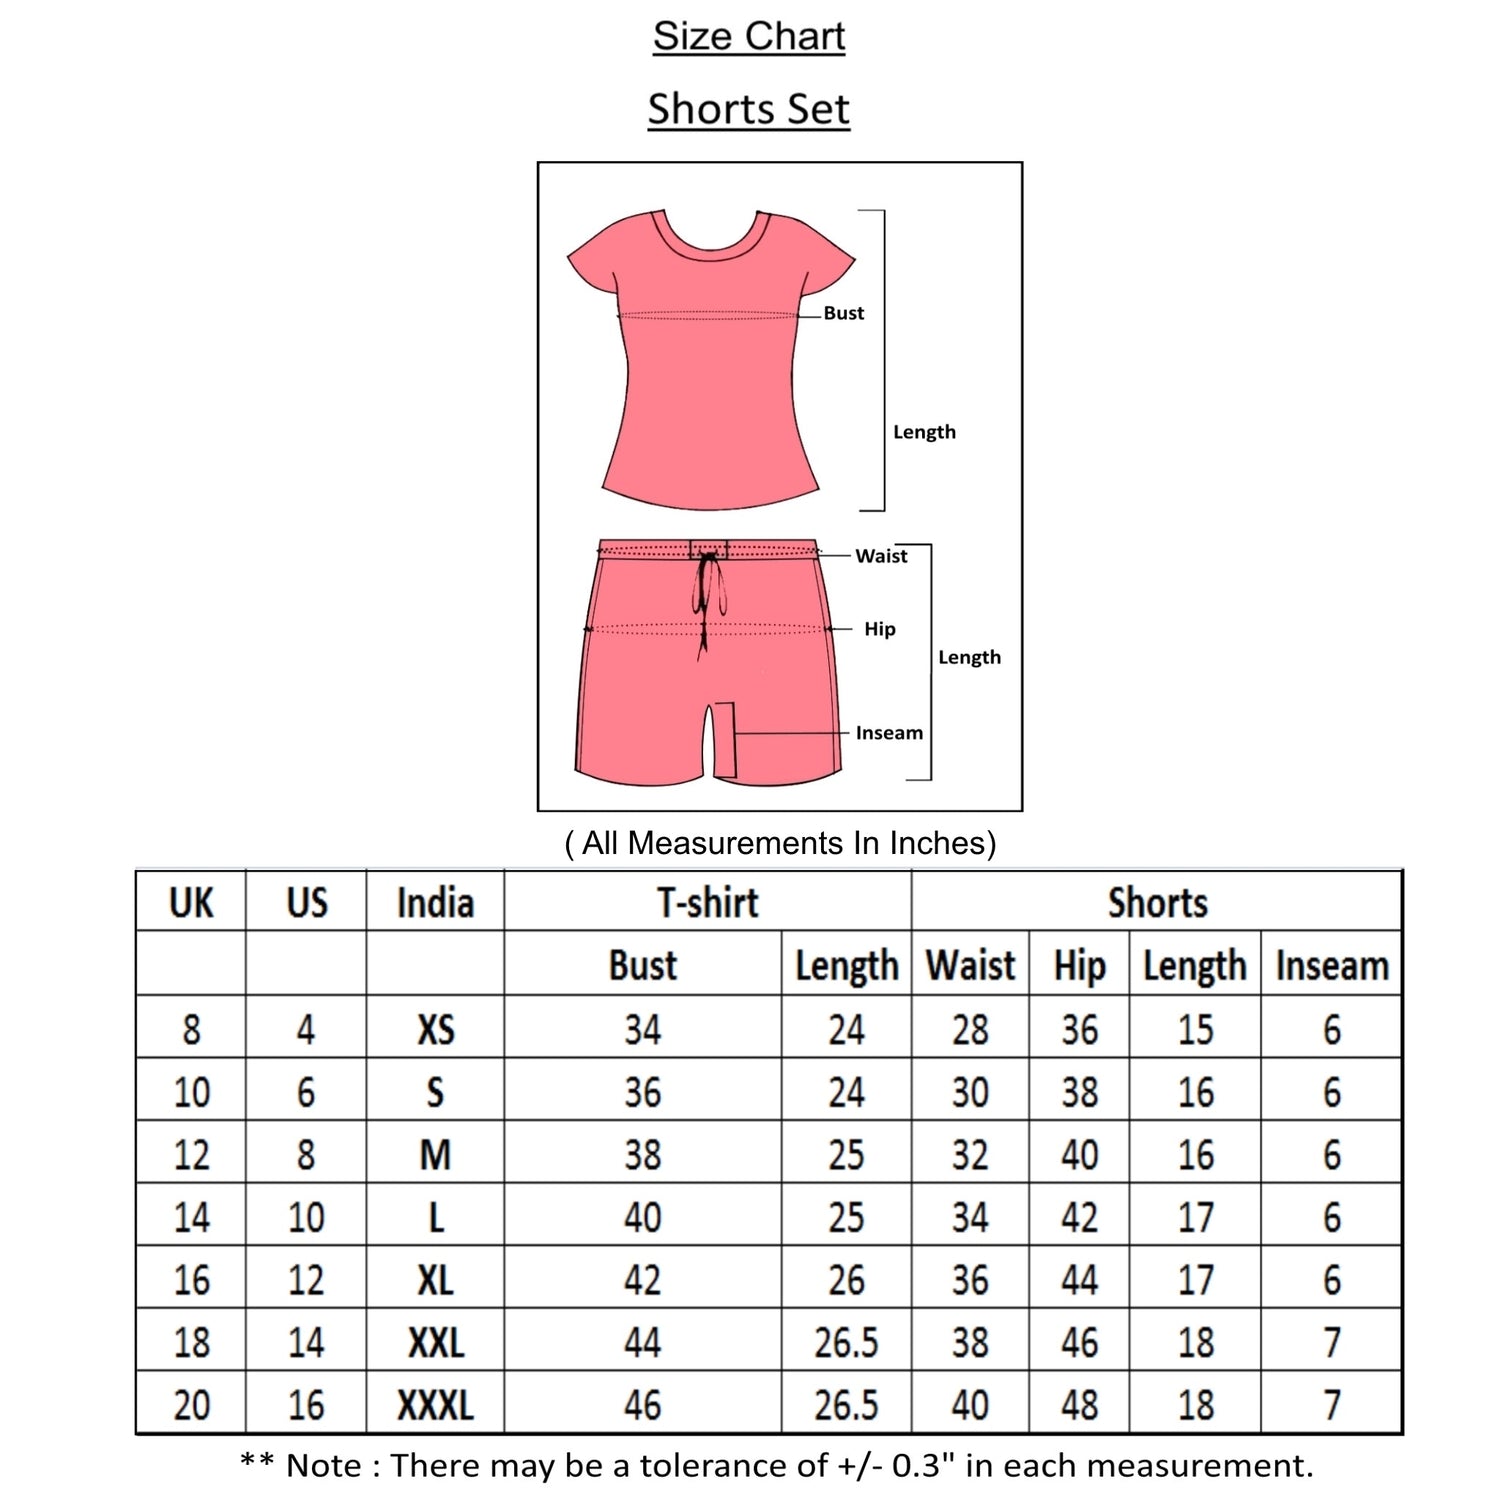 size chart of shorts set. All sizes available from small to 3xl